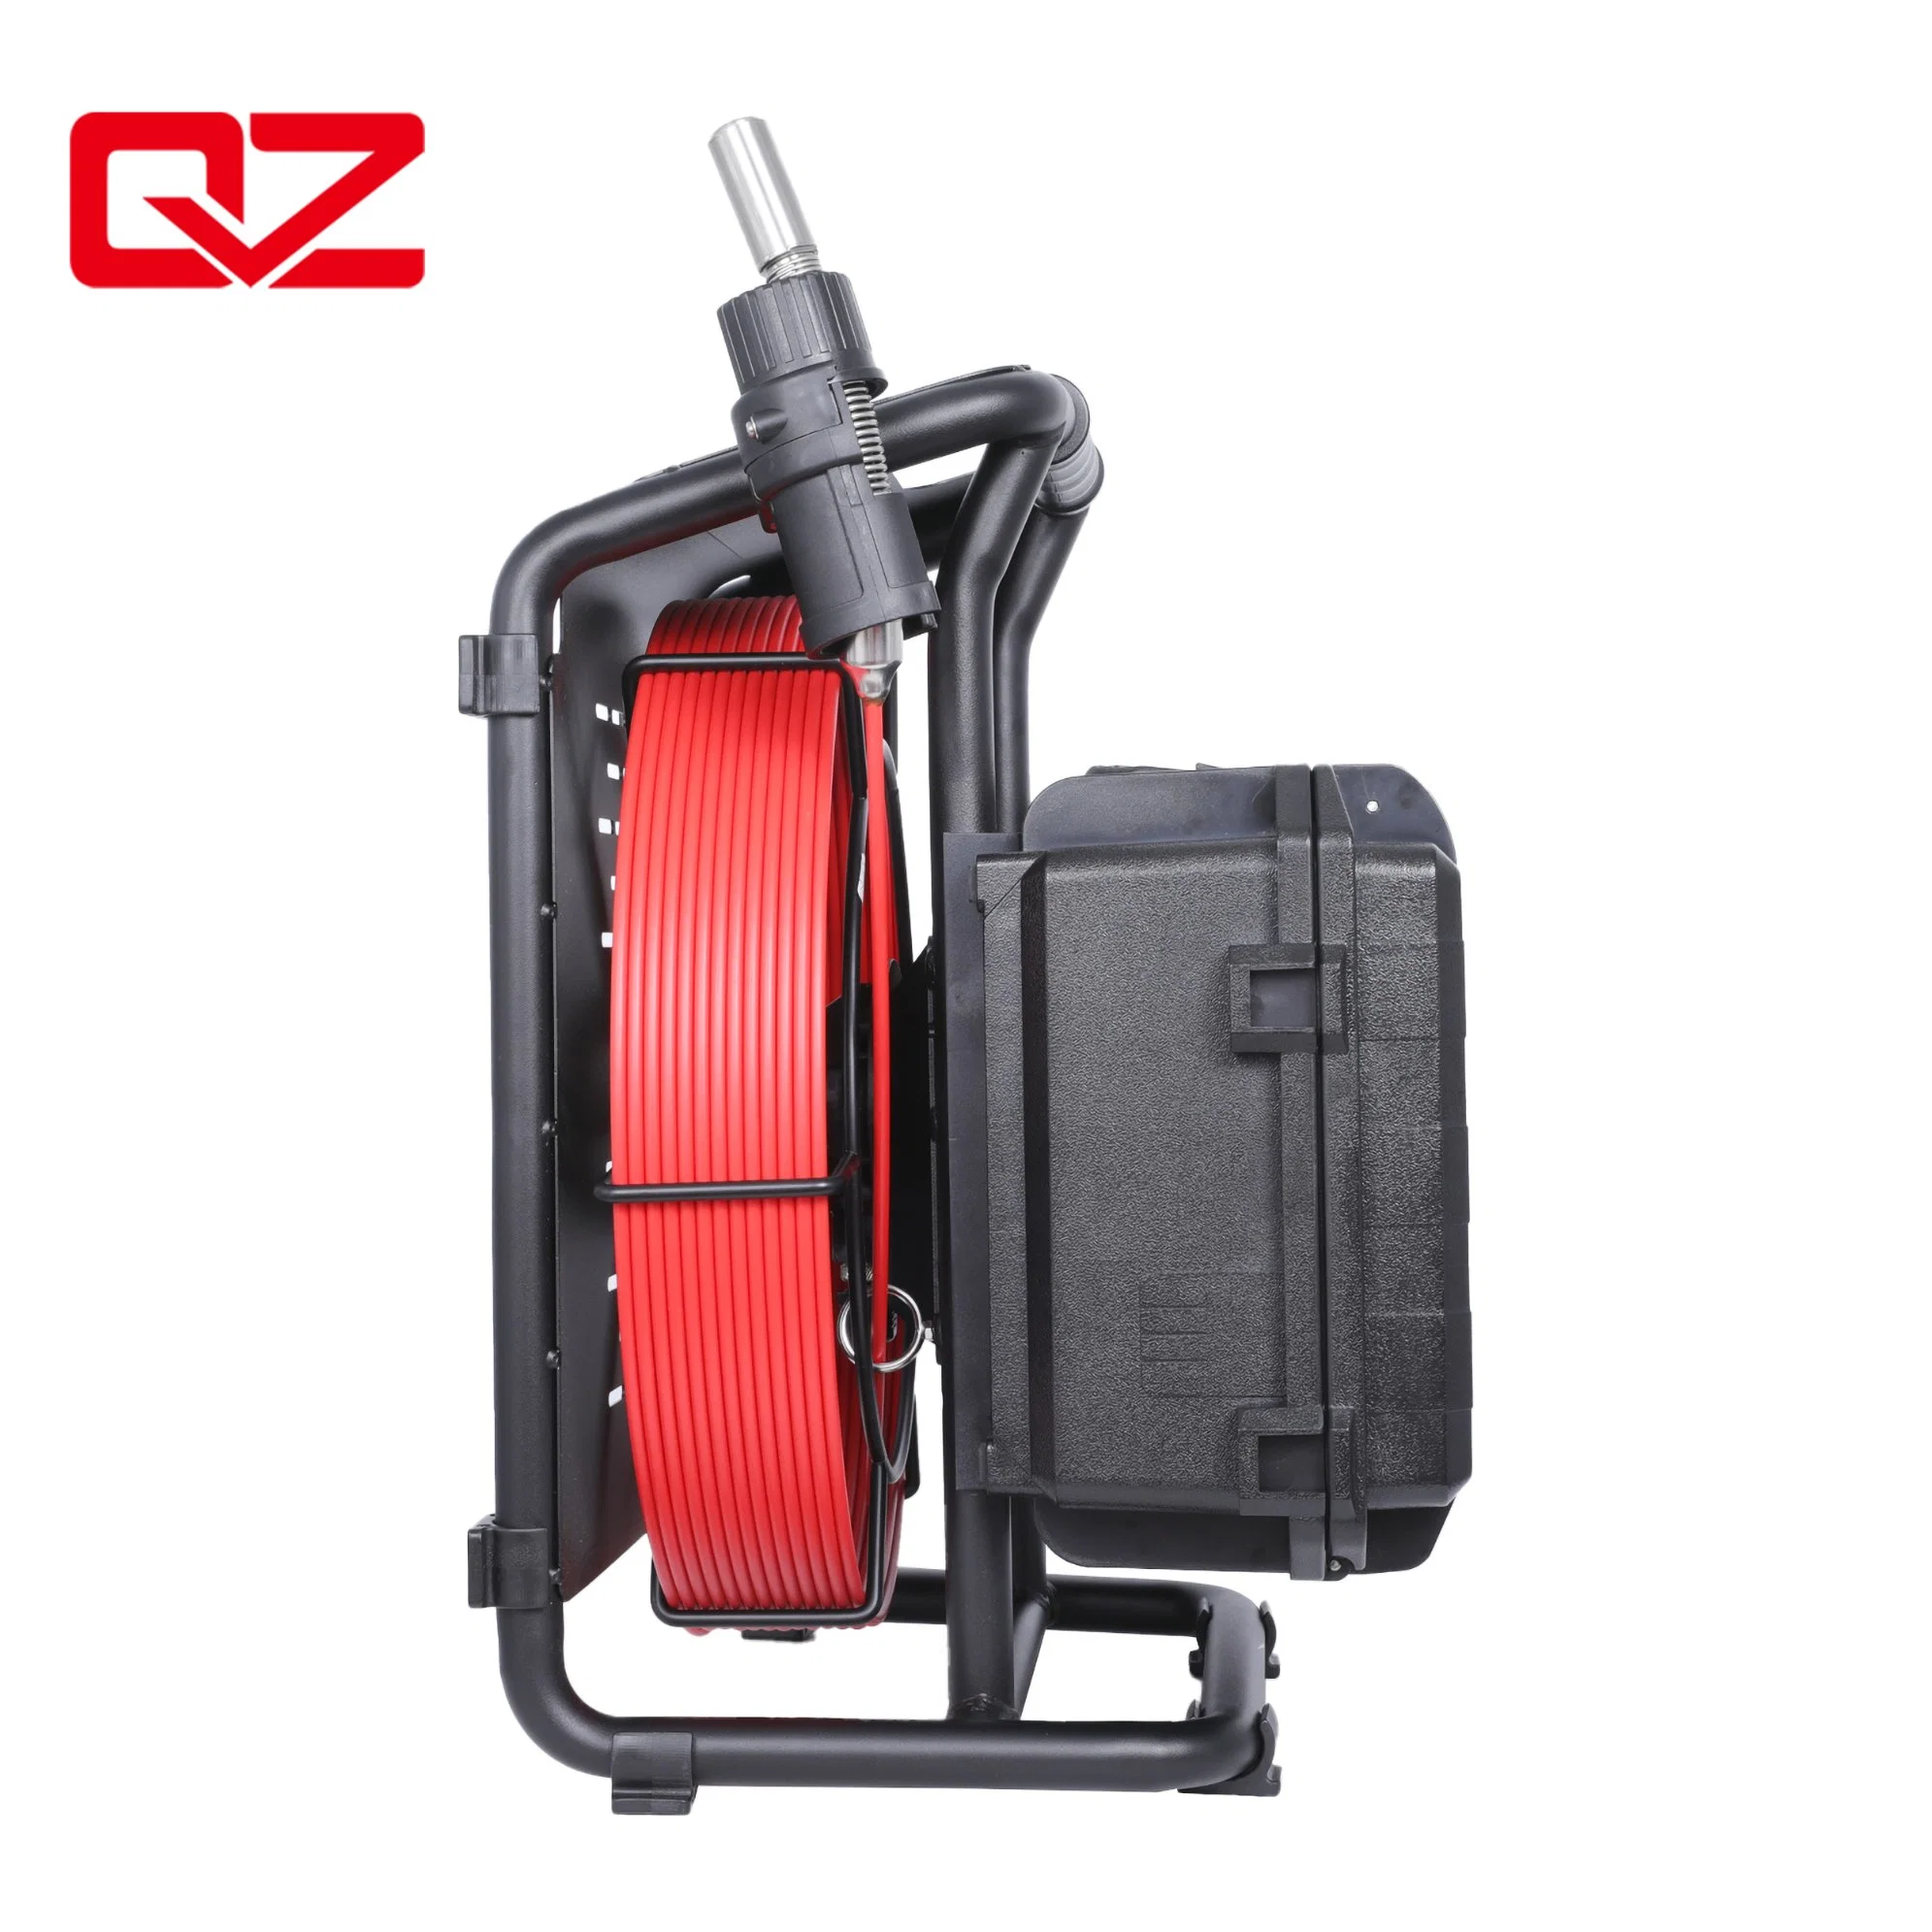 21mm Camera Head 1080P HD Pipeline Detection Drain Sewer Pipe Inspection Camera System